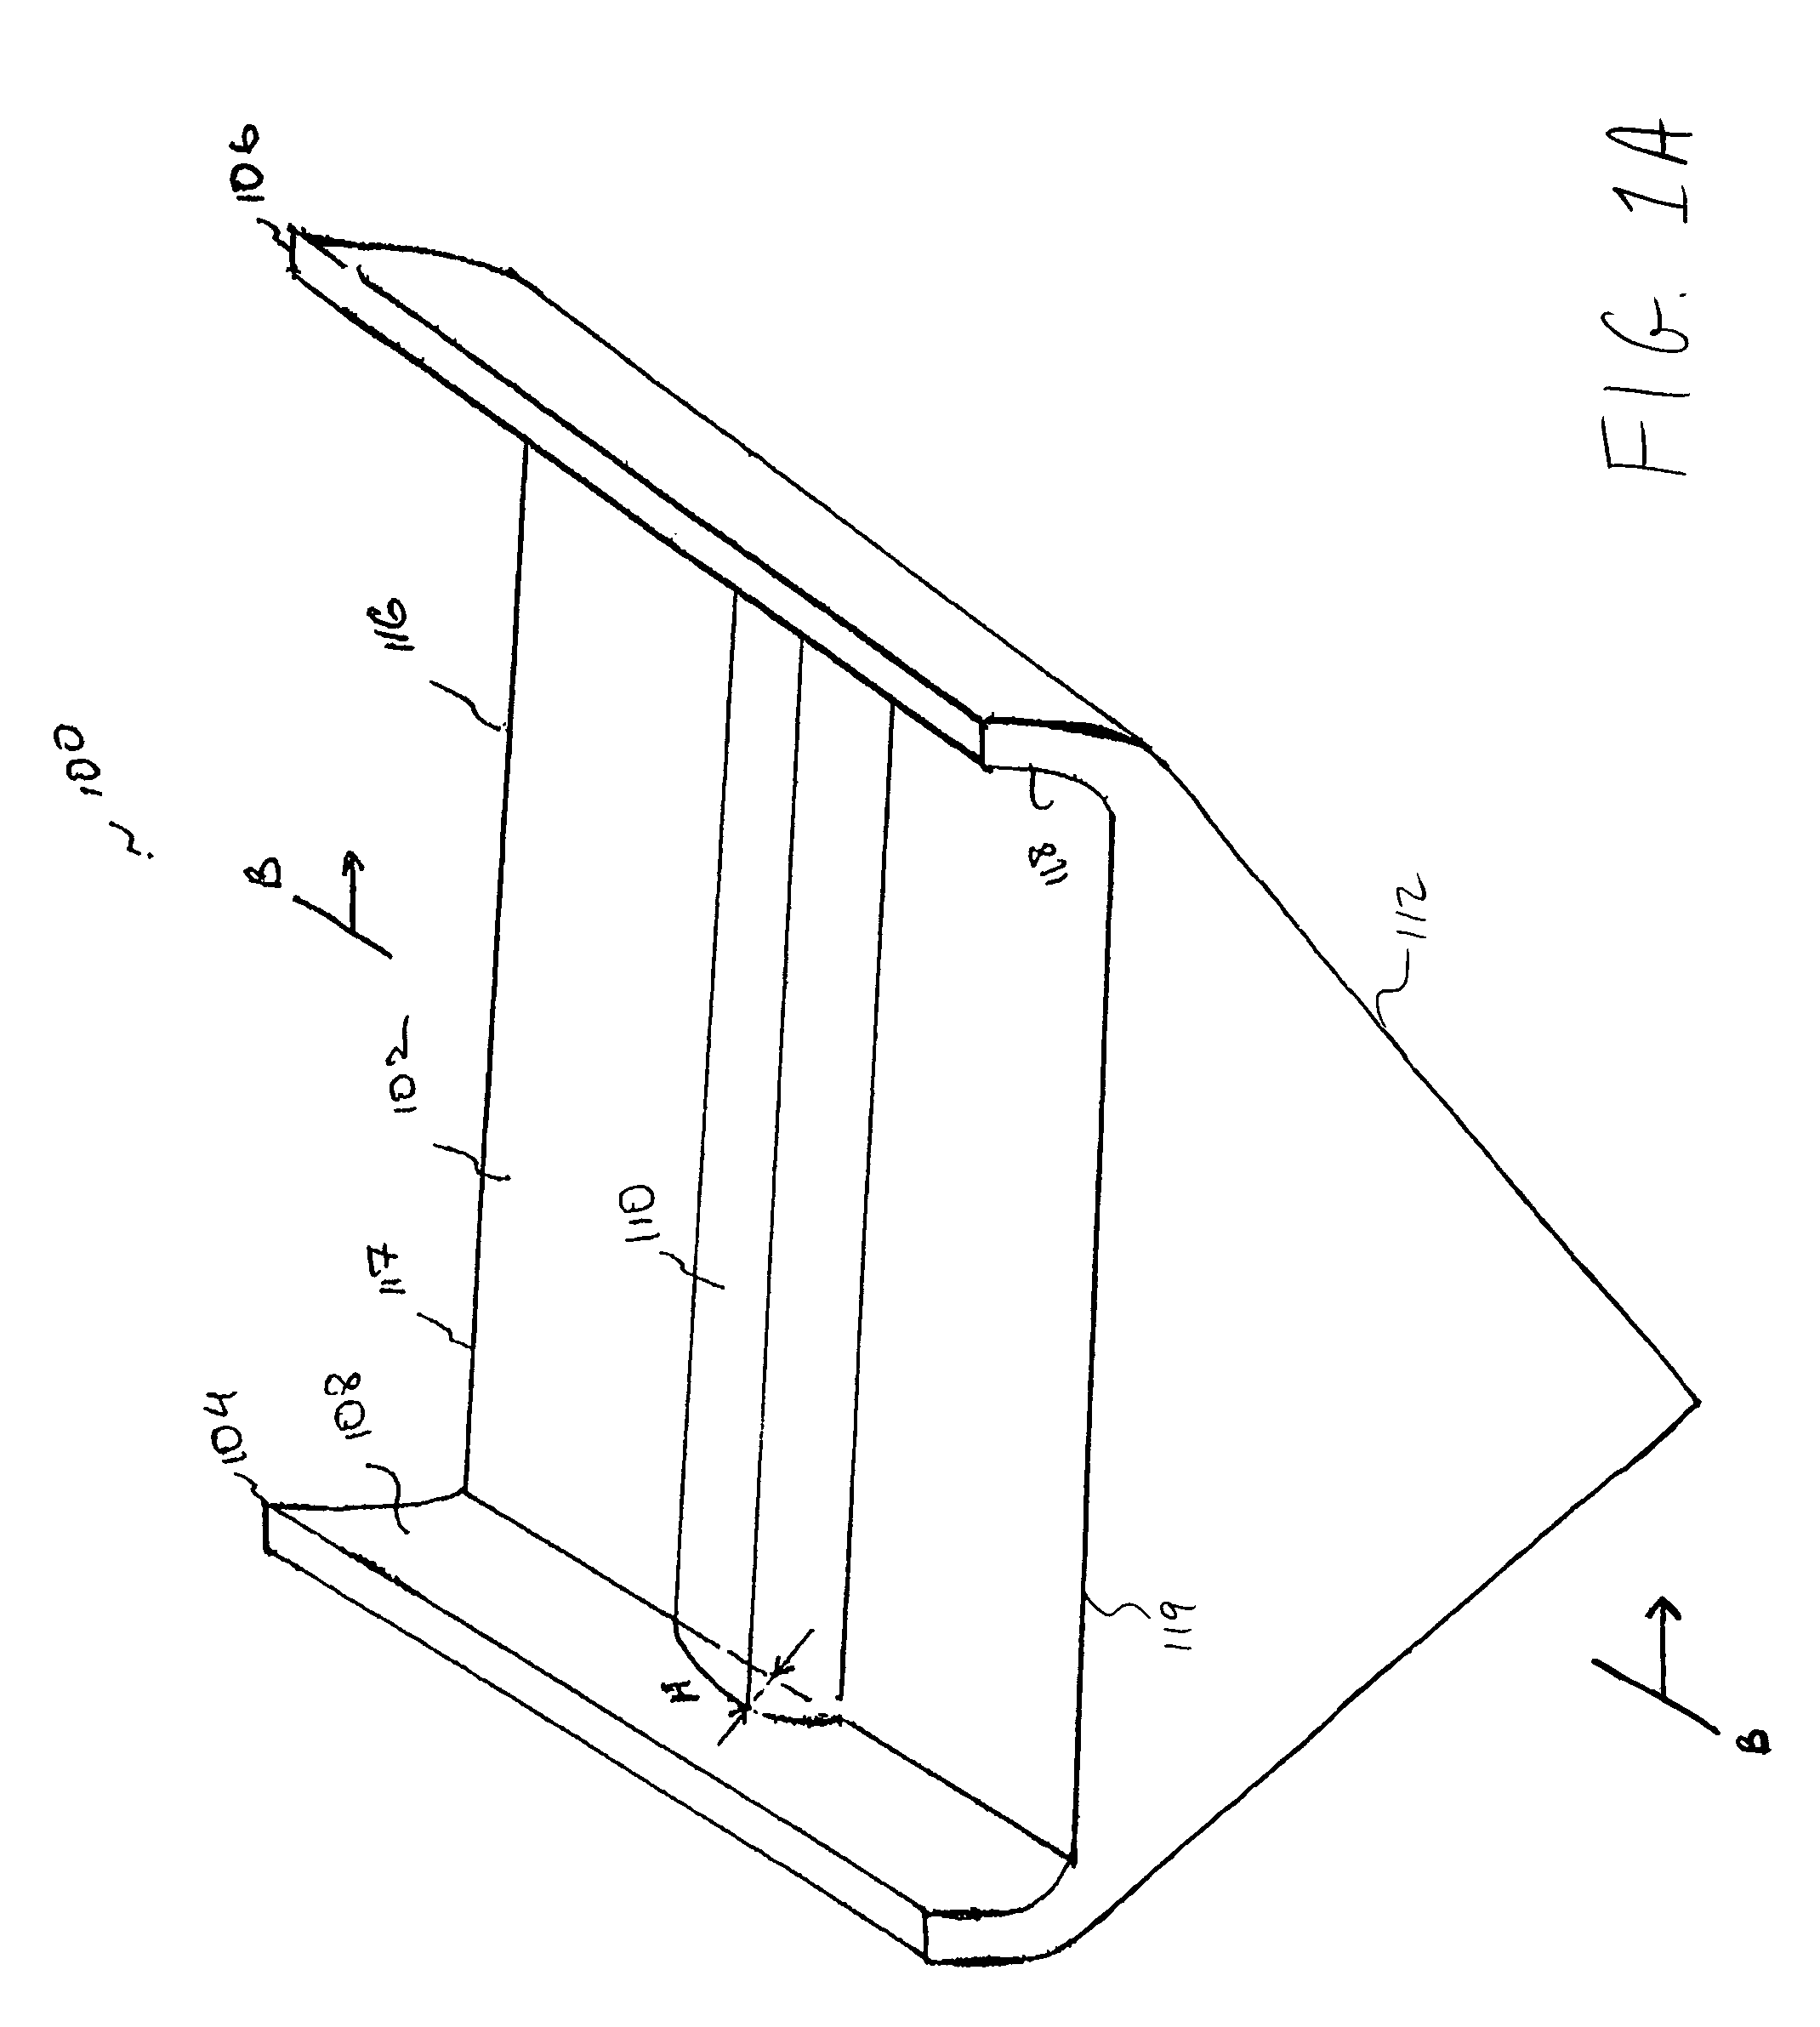 Palm print scanner and methods